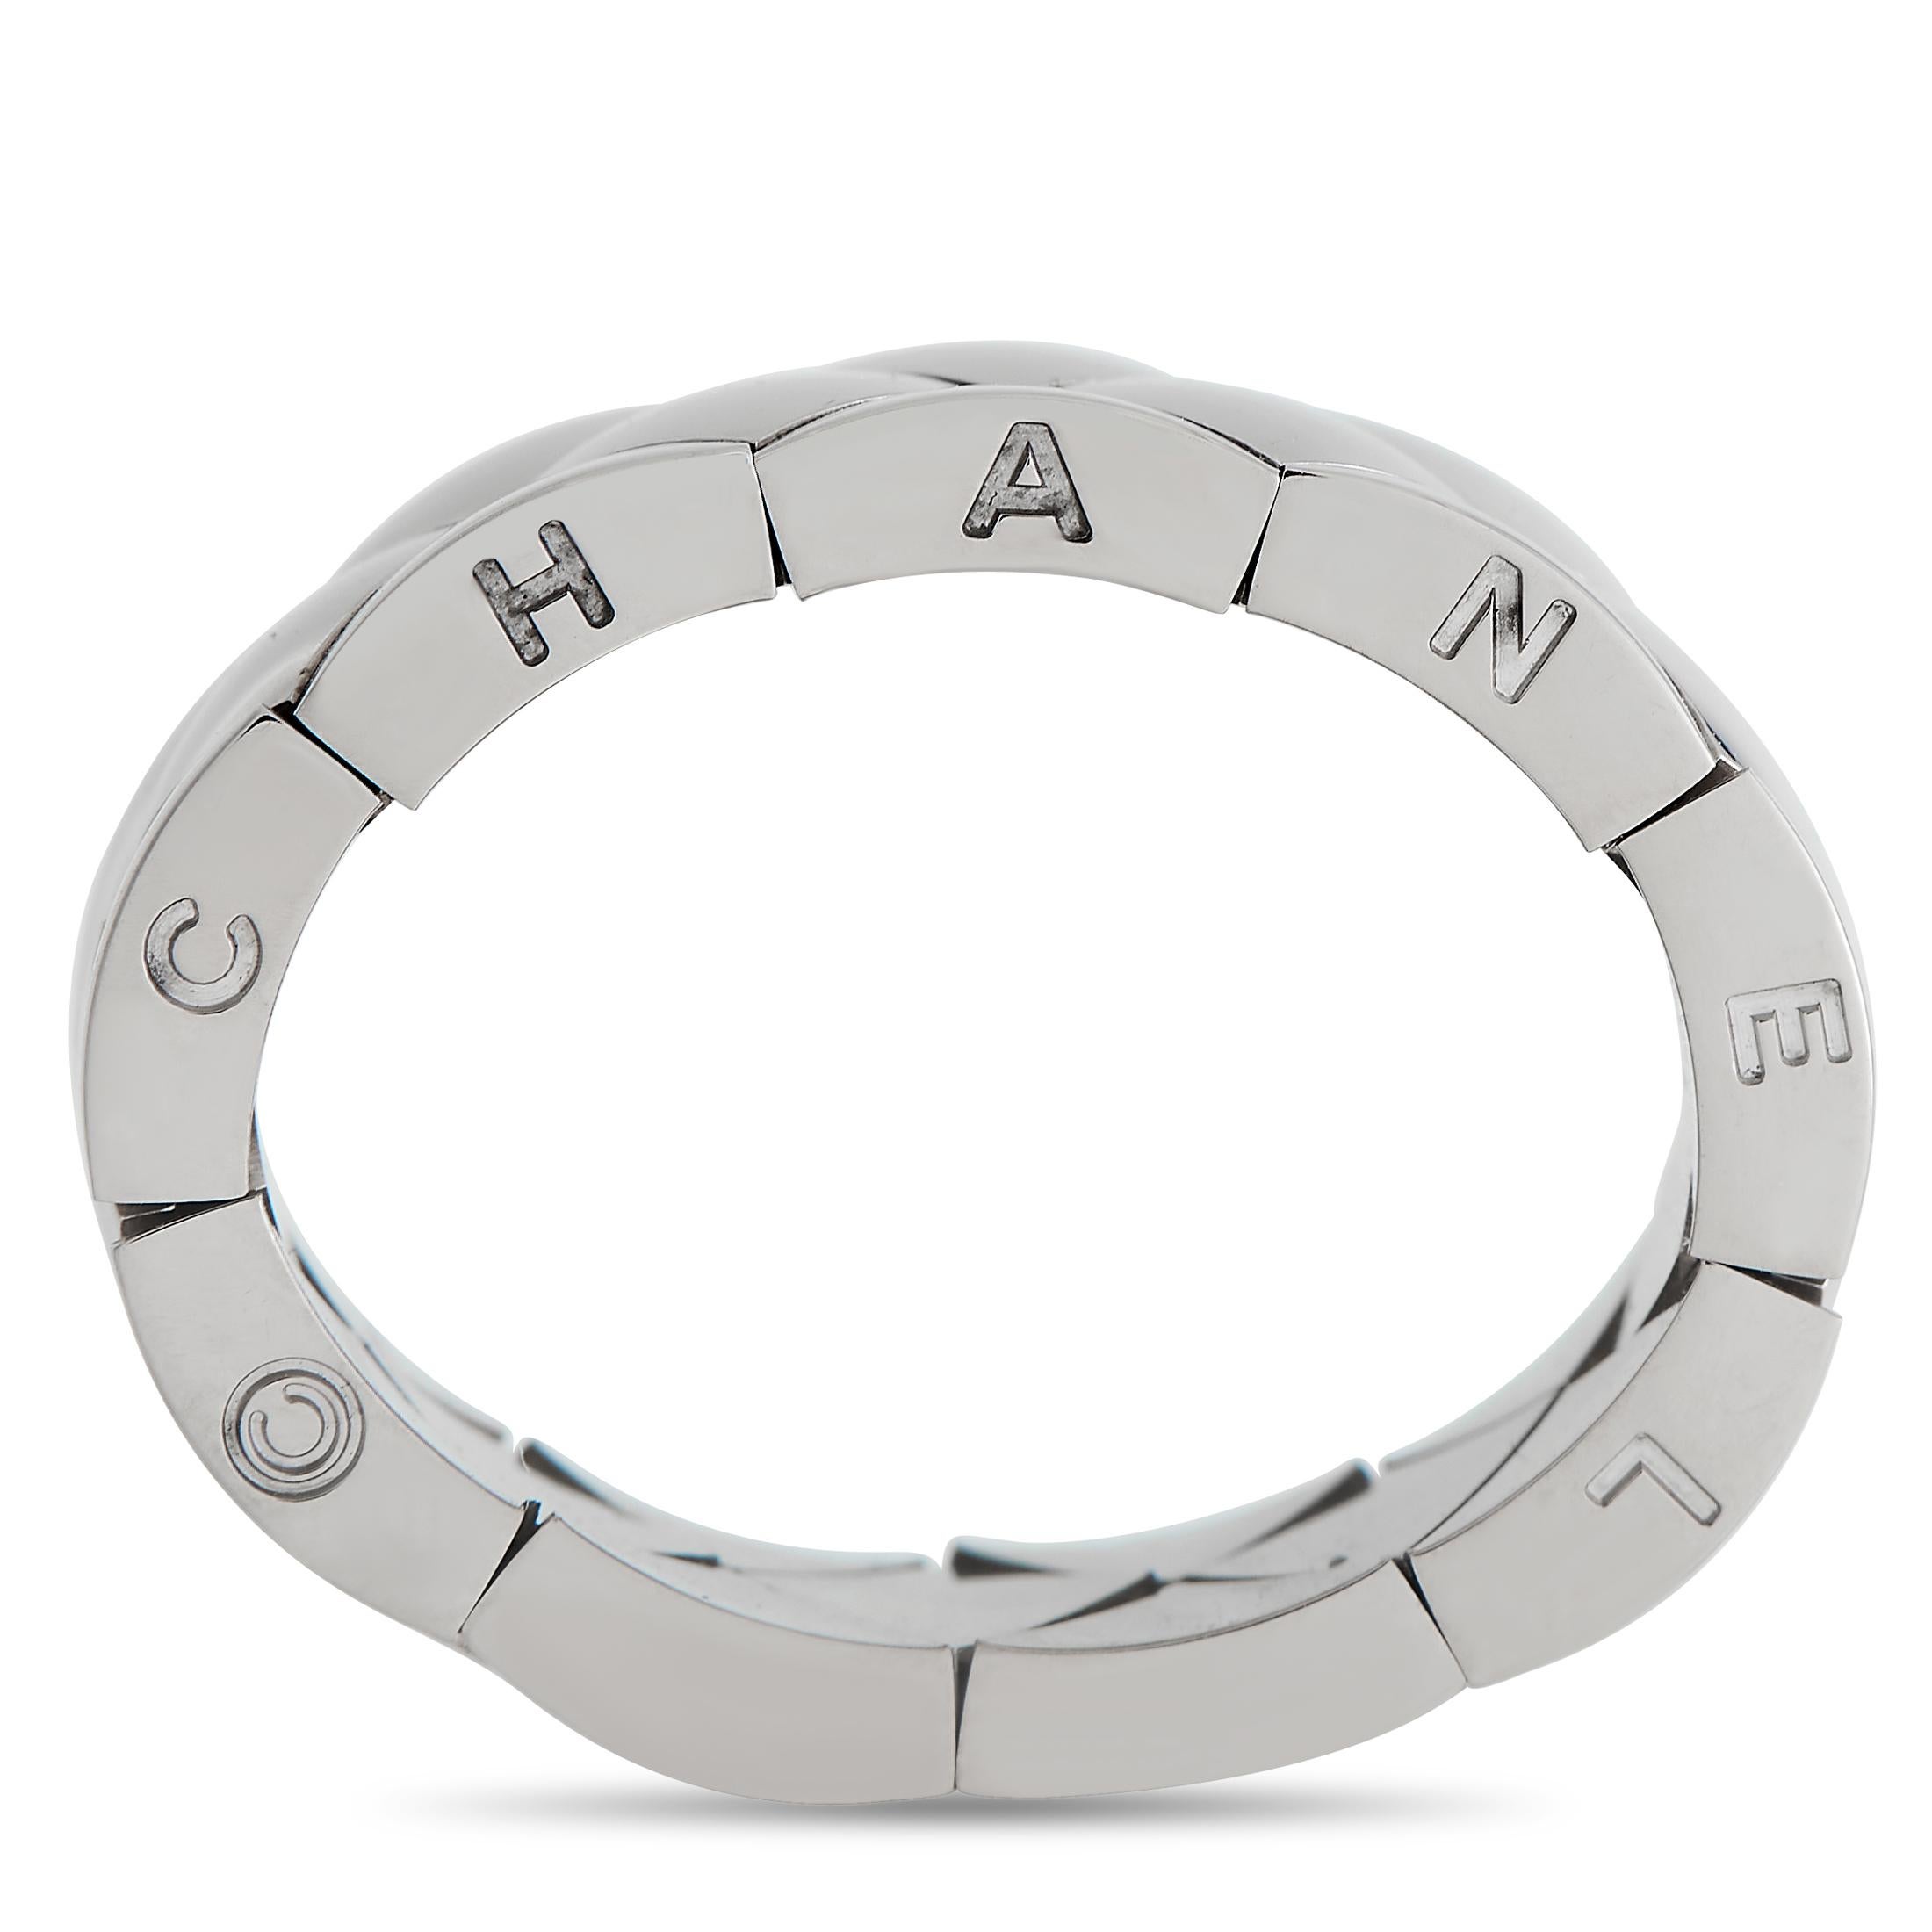 Simple, elegant, and decidedly chic, this Chanel band ring will add a touch of luxury to any ensemble it’s paired with. This piece measures 7mm wide and features the brand’s signature quilted texture around the perimeter. Crafted from 18K White